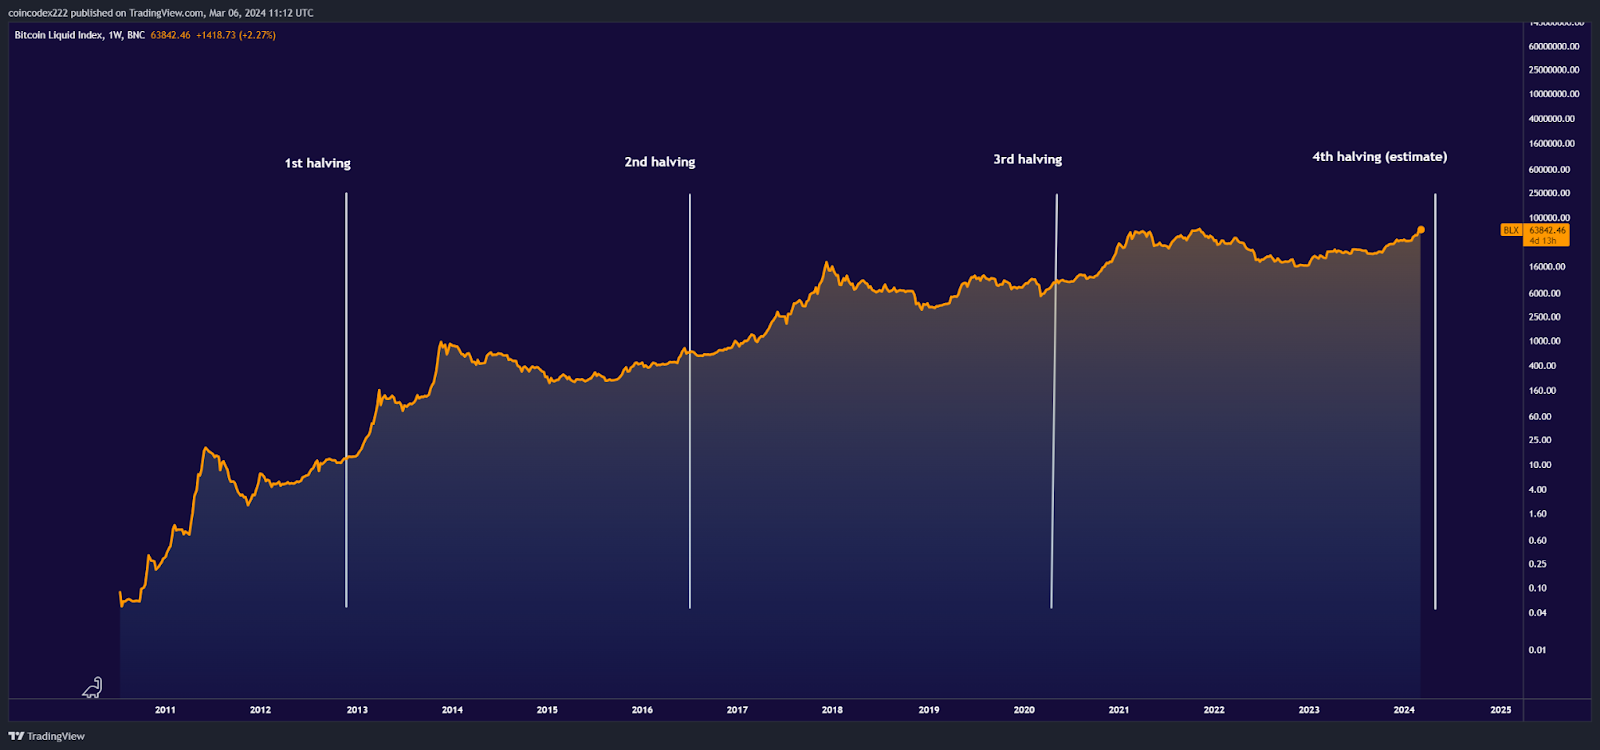 What can the past Bitcoin halving cycles tell us about its future? - 1